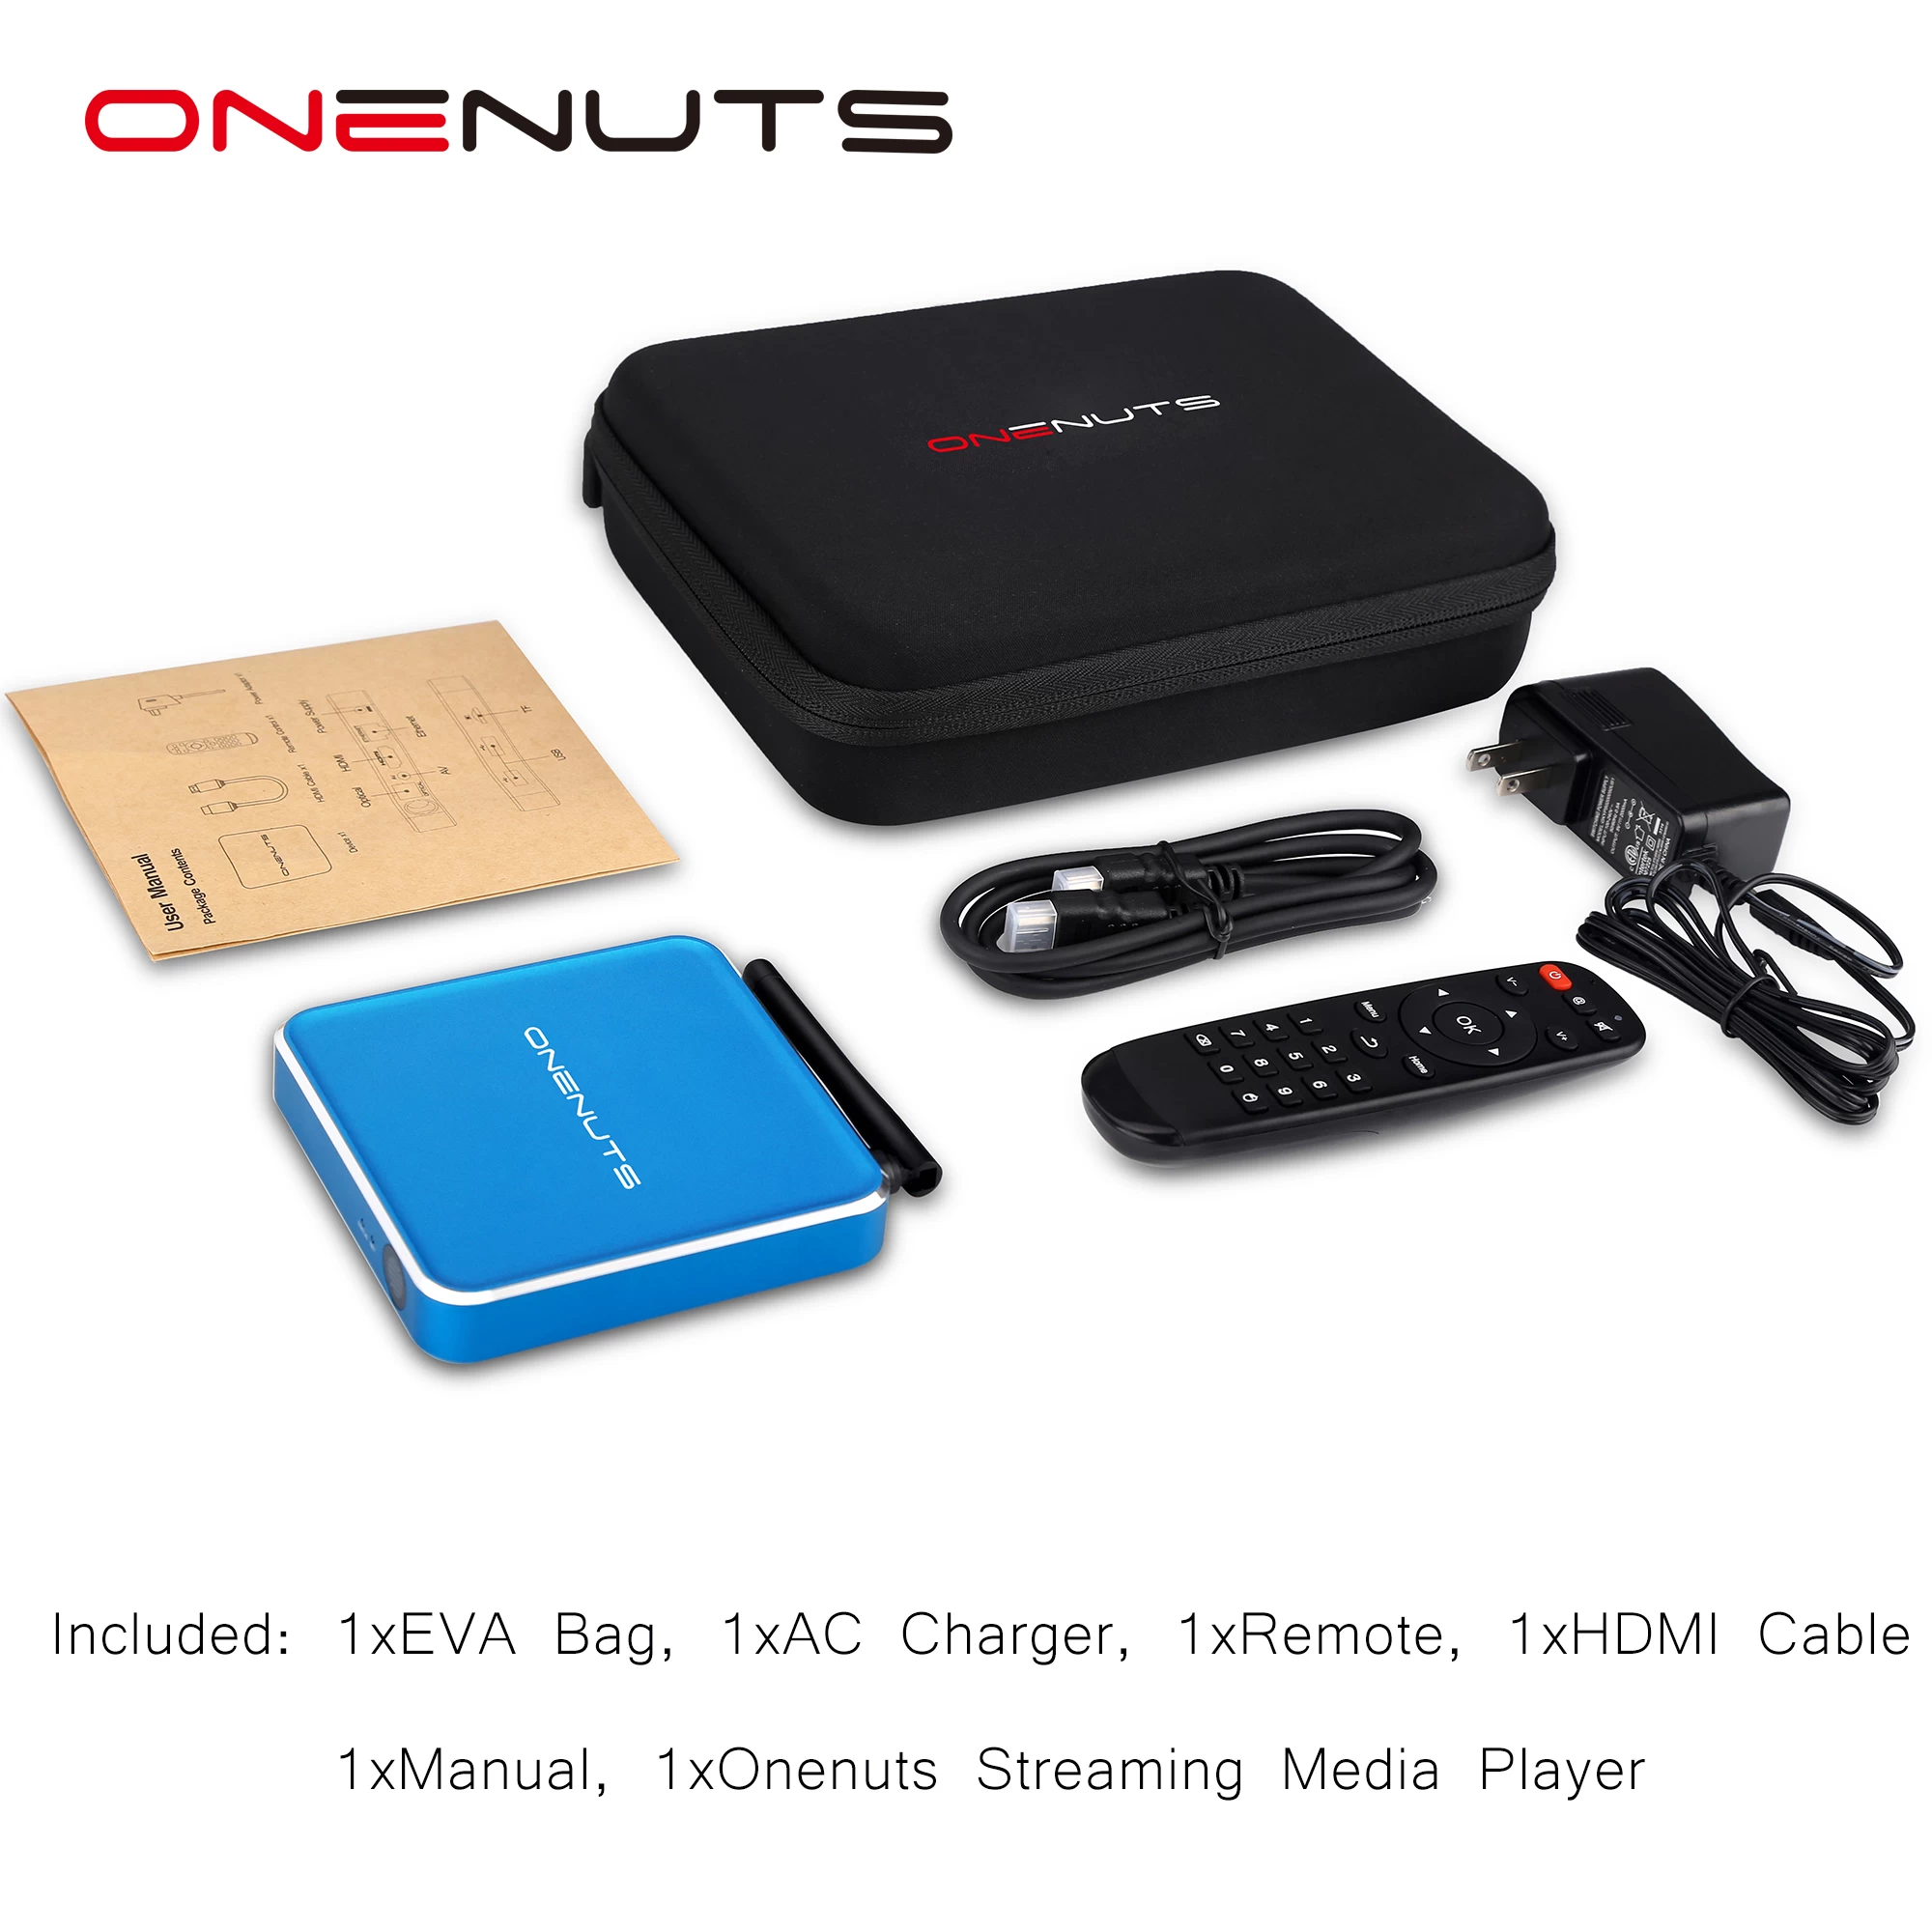 4K Android TV Box Manufacturer